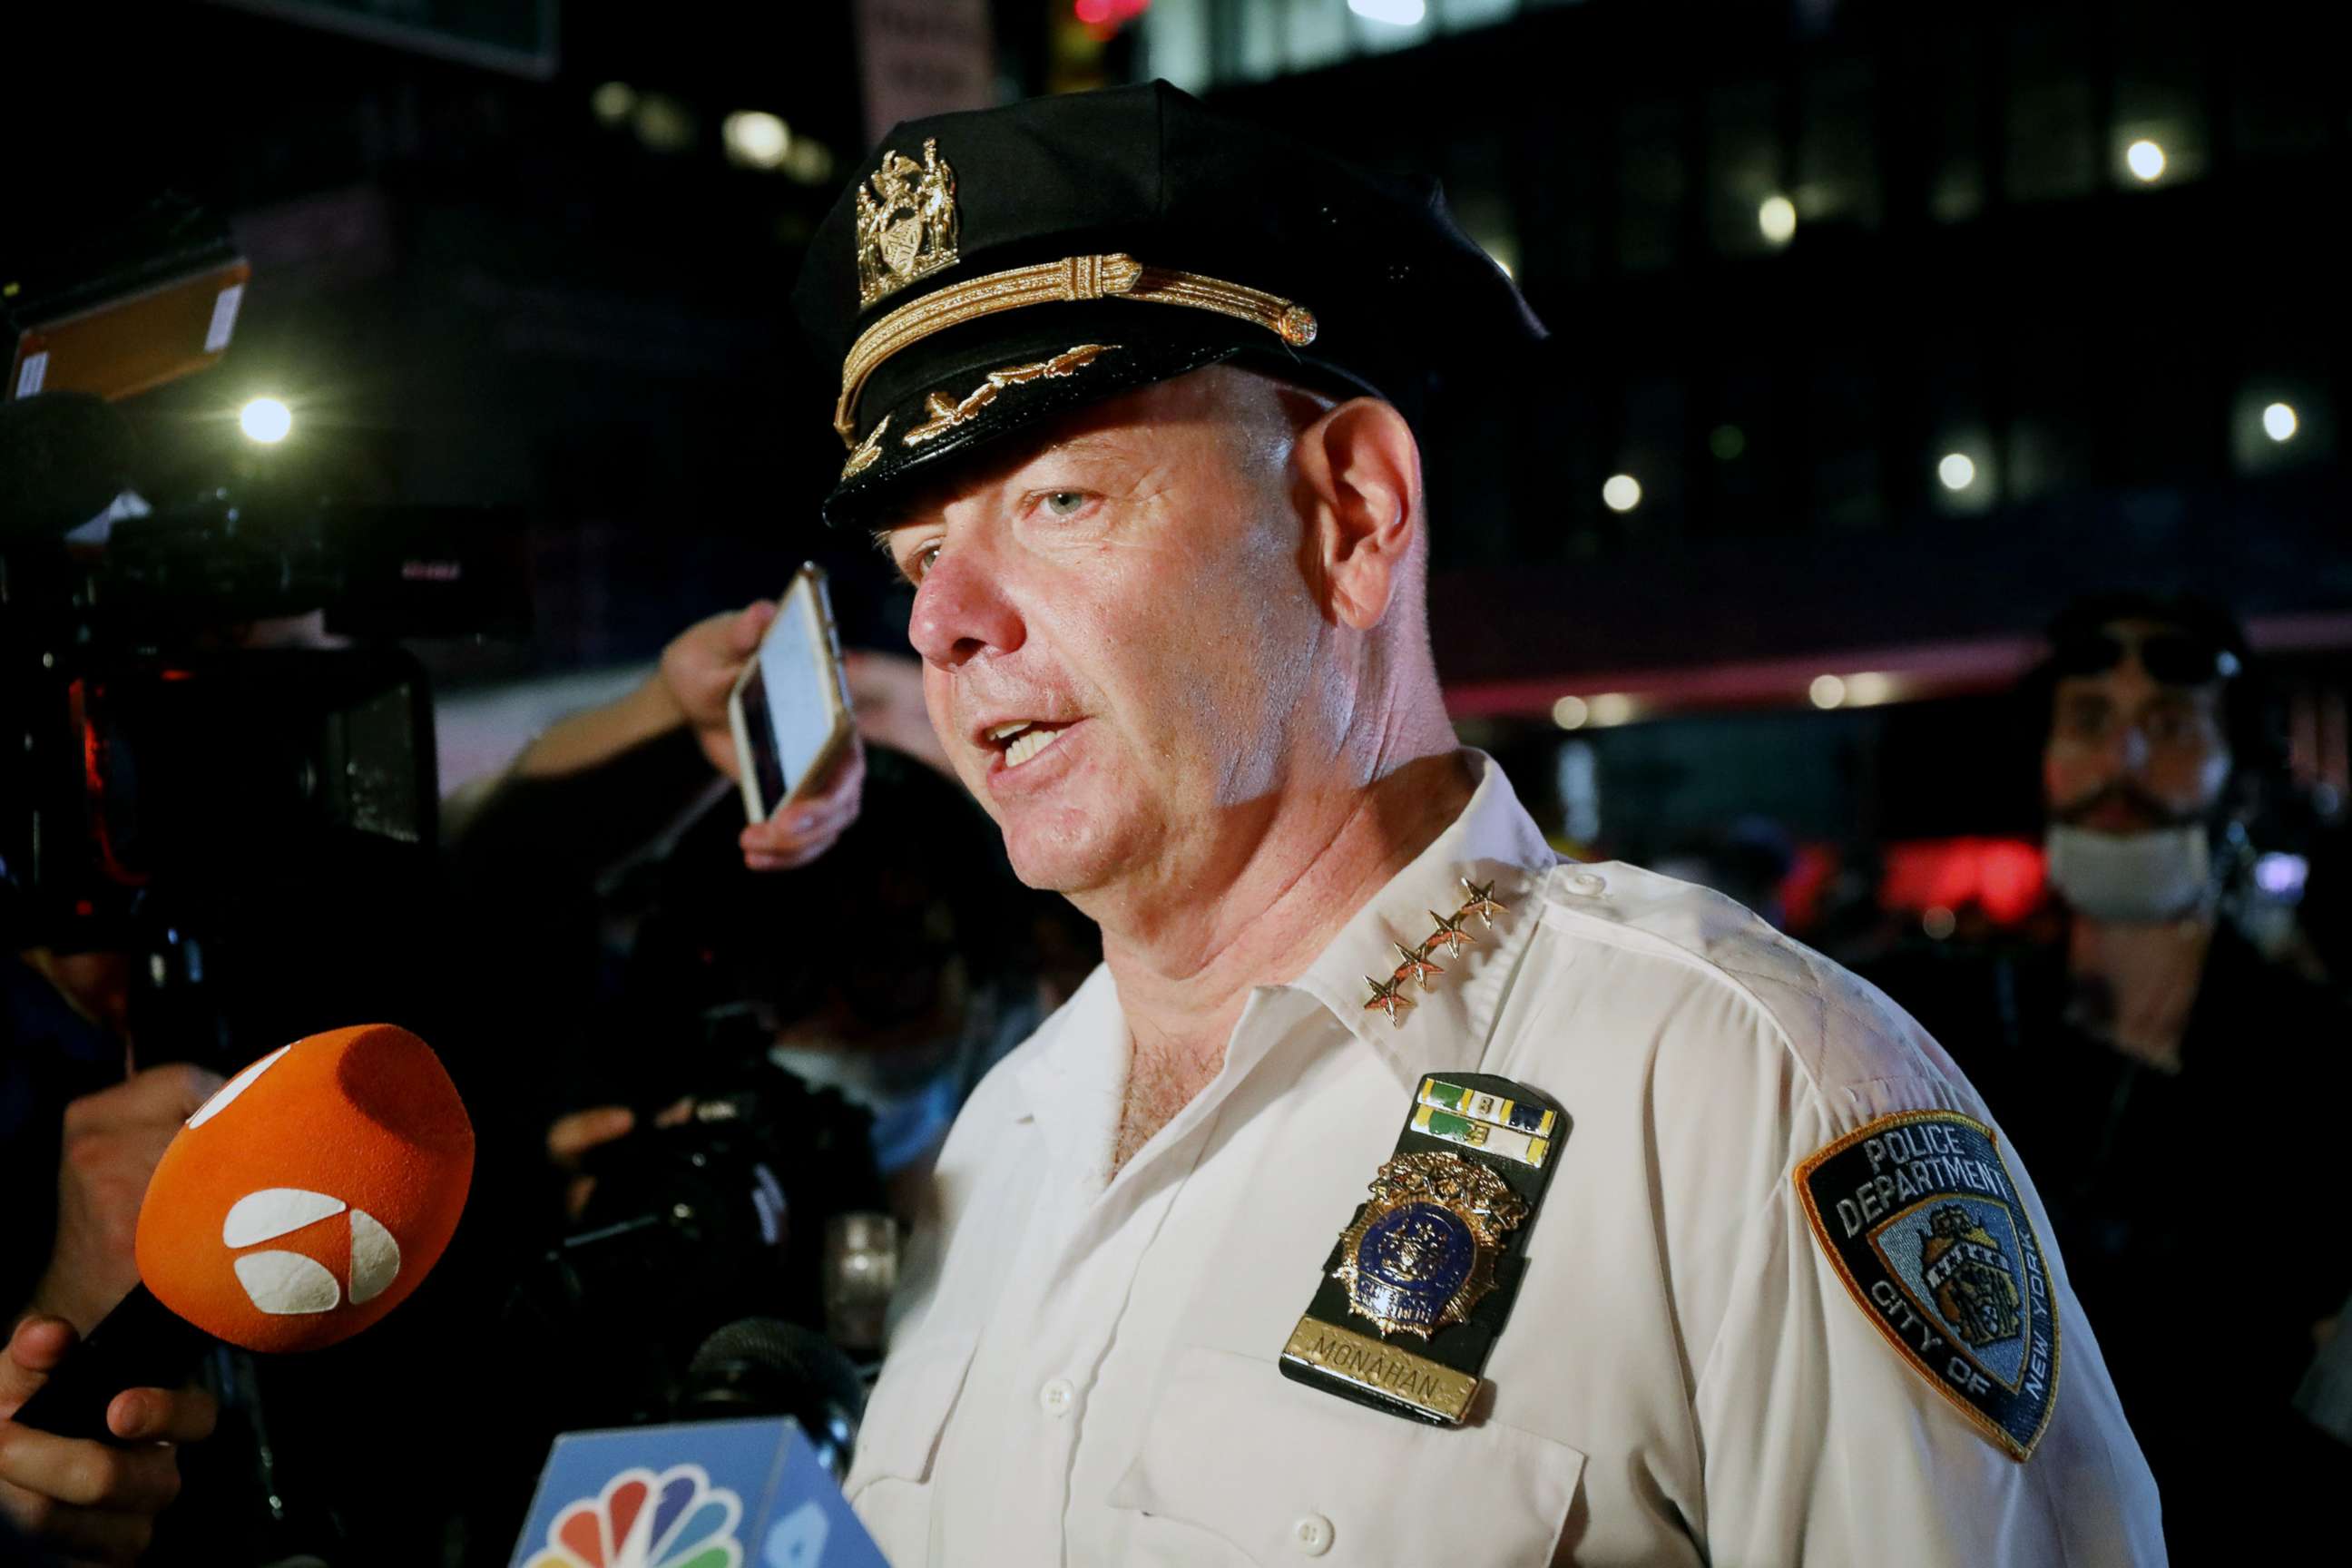 PHOTO: Chief of Department Terence Monahan speaks to the media at the scene of a mass arrest of protesters in Manhattan  on June 3, 2020 in New York City.